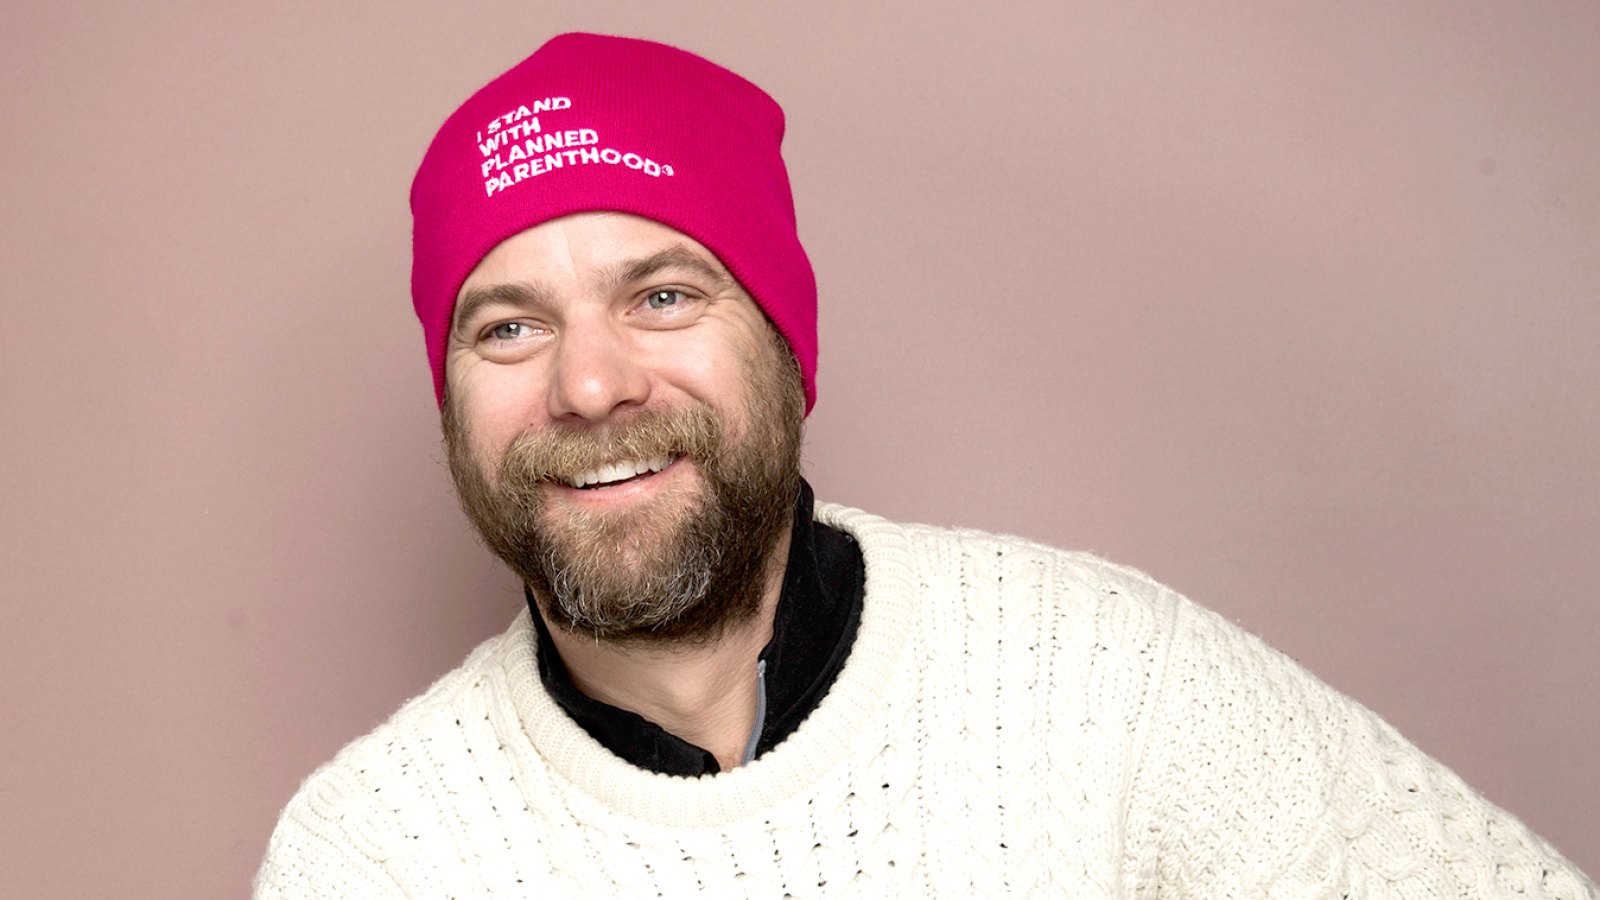 Joshua Jackson poses for a portrait to promote Women's March on Main at the Music Lodge during the Sundance Film Festival on Saturday, Jan. 21, 2017, in Park City, Utah.